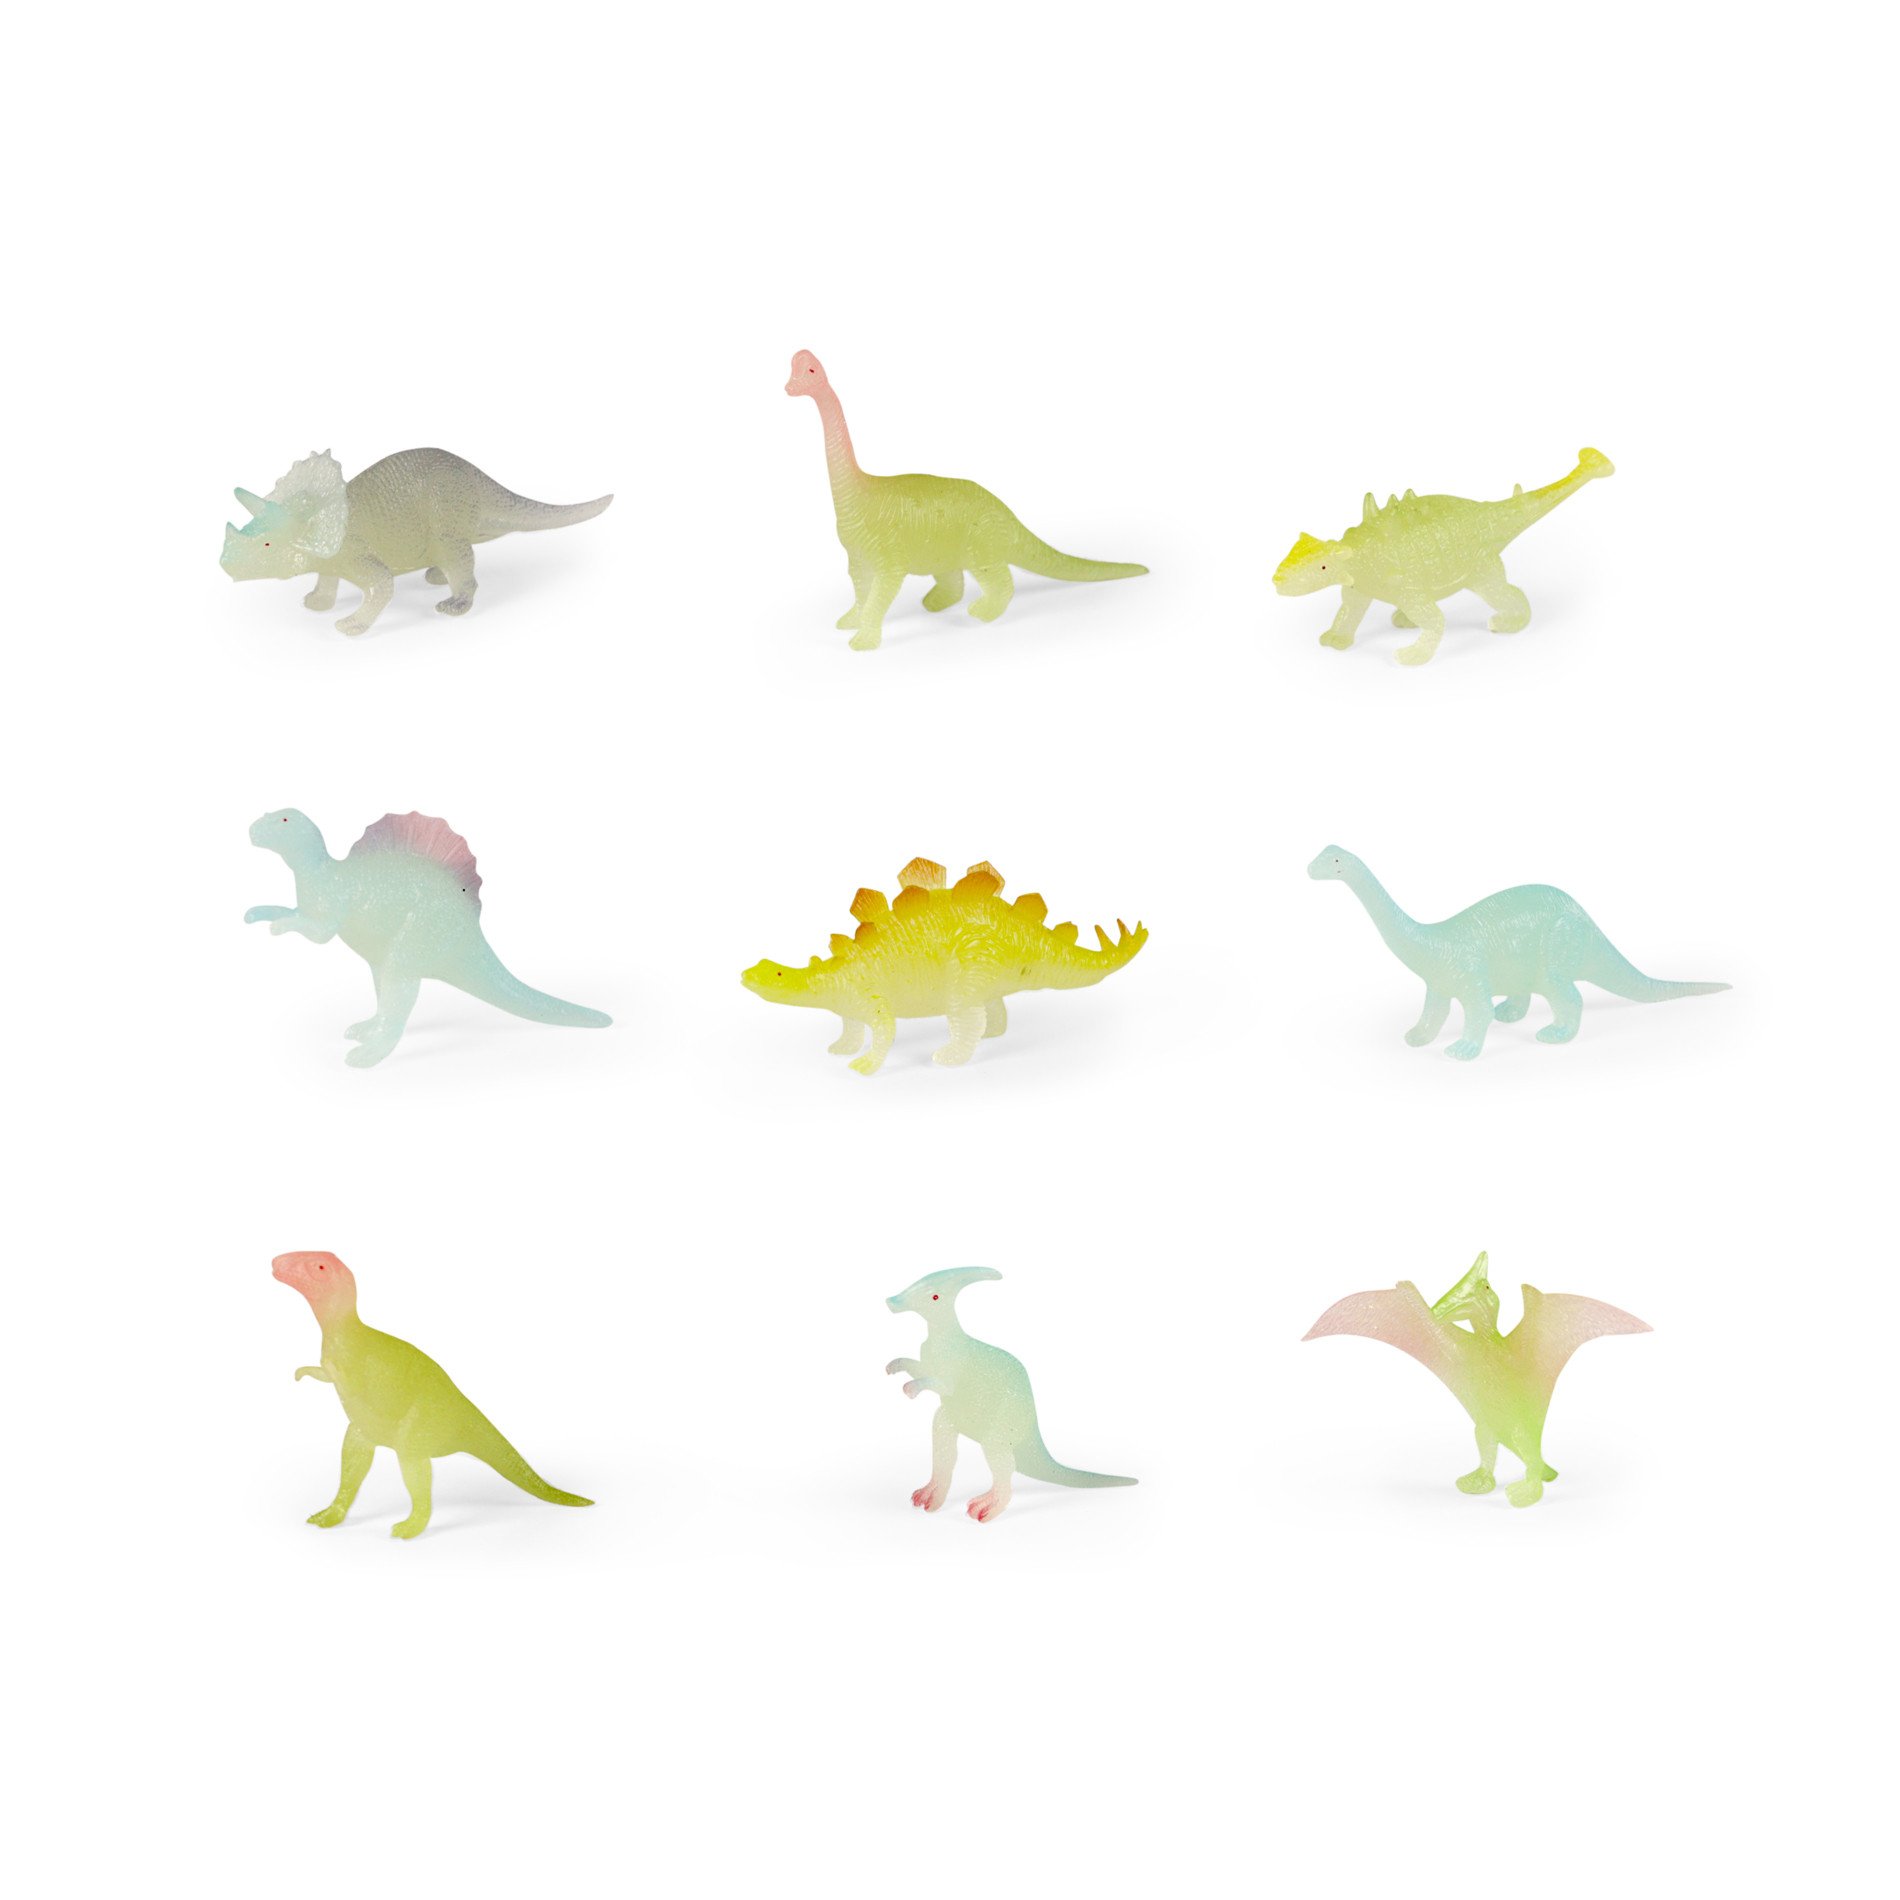 the dinosaurs, glowing in the dark, 9pcs